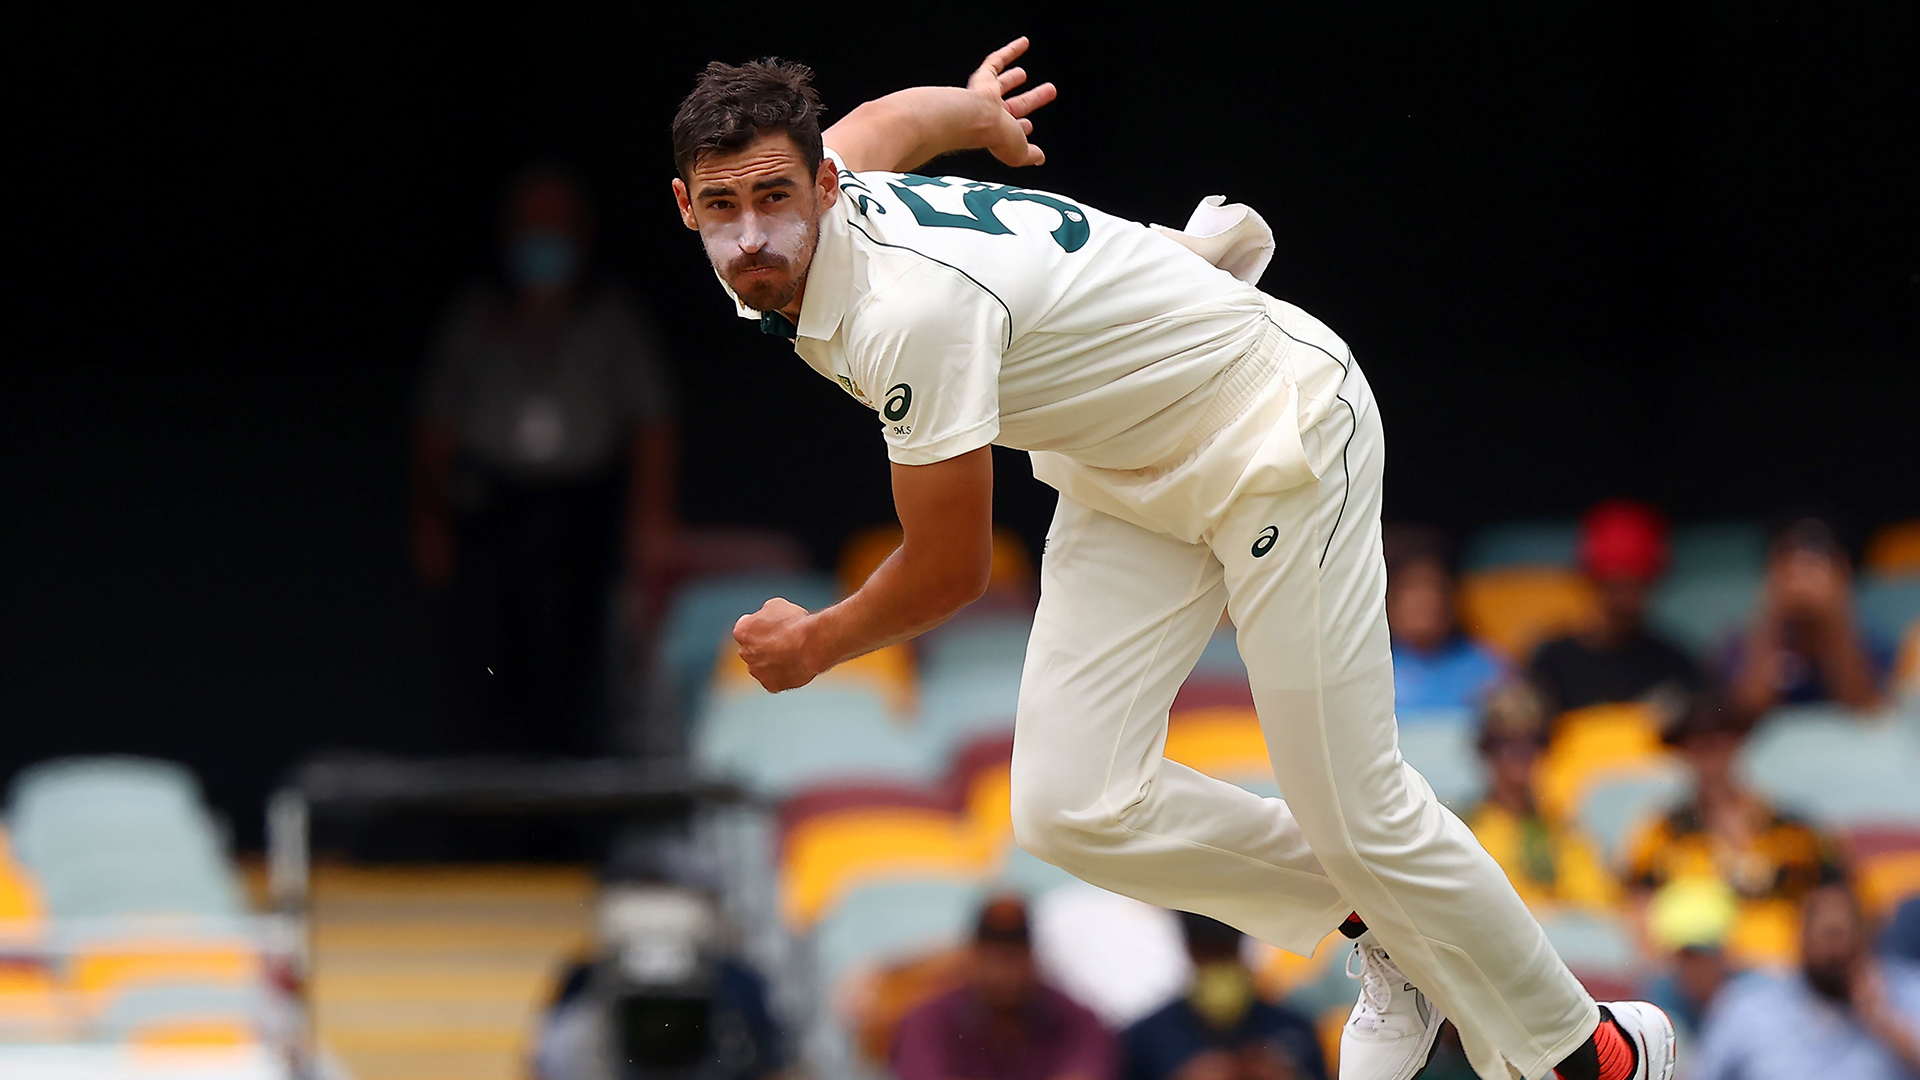 Ashes 2021-22| Twitter reacts as Mitchell Starc becomes second bowler to pick up a wicket in the first delivery of the series